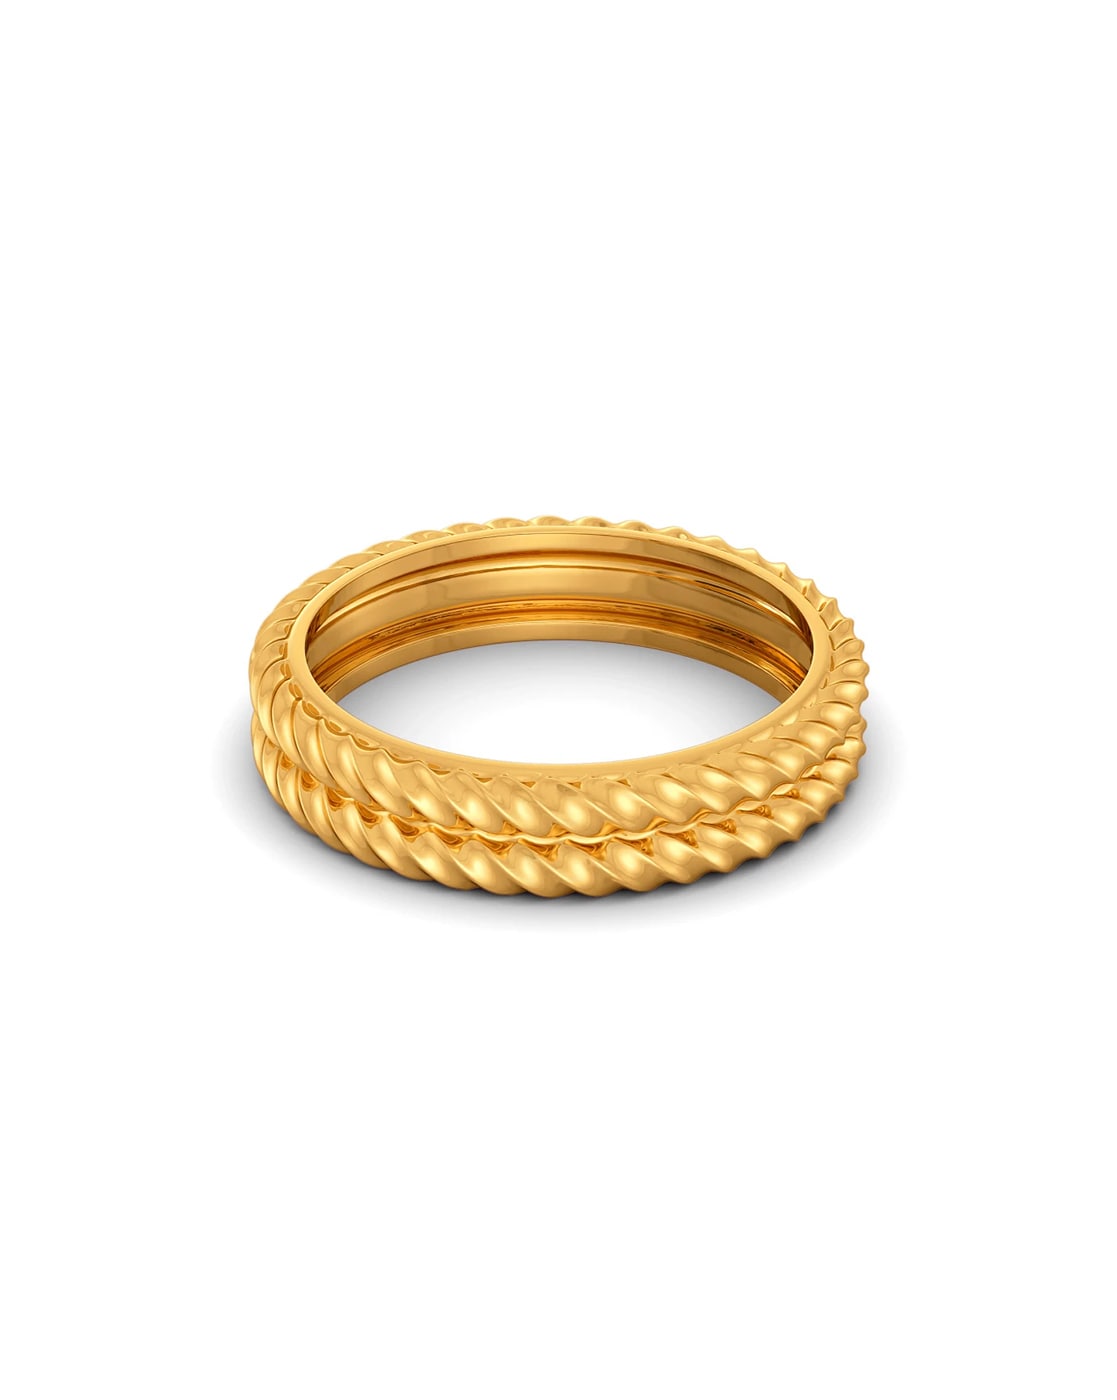 Ultra Thin Rope Stacking Ring in 21K Yellow Gold